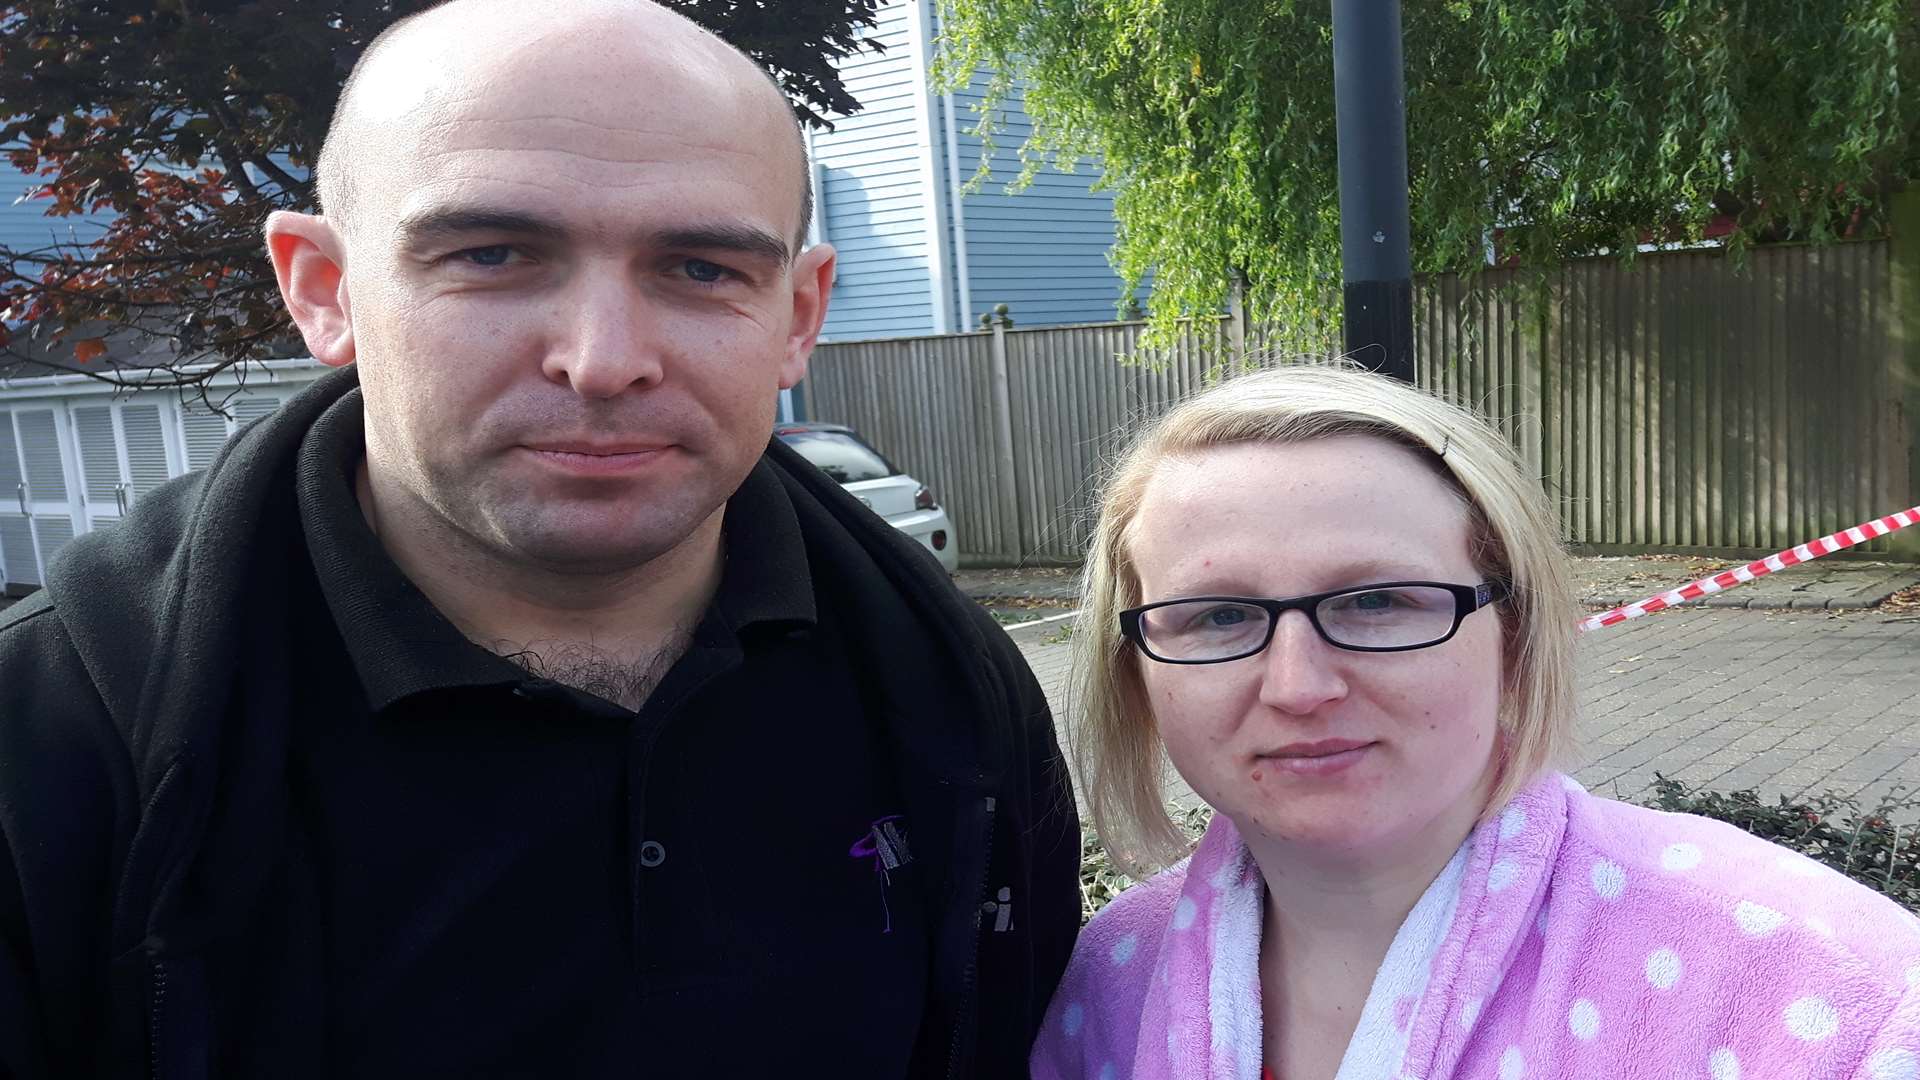 Leigh-Anne Osborne escaped from the fire with her 9 month old baby while husband James was at work